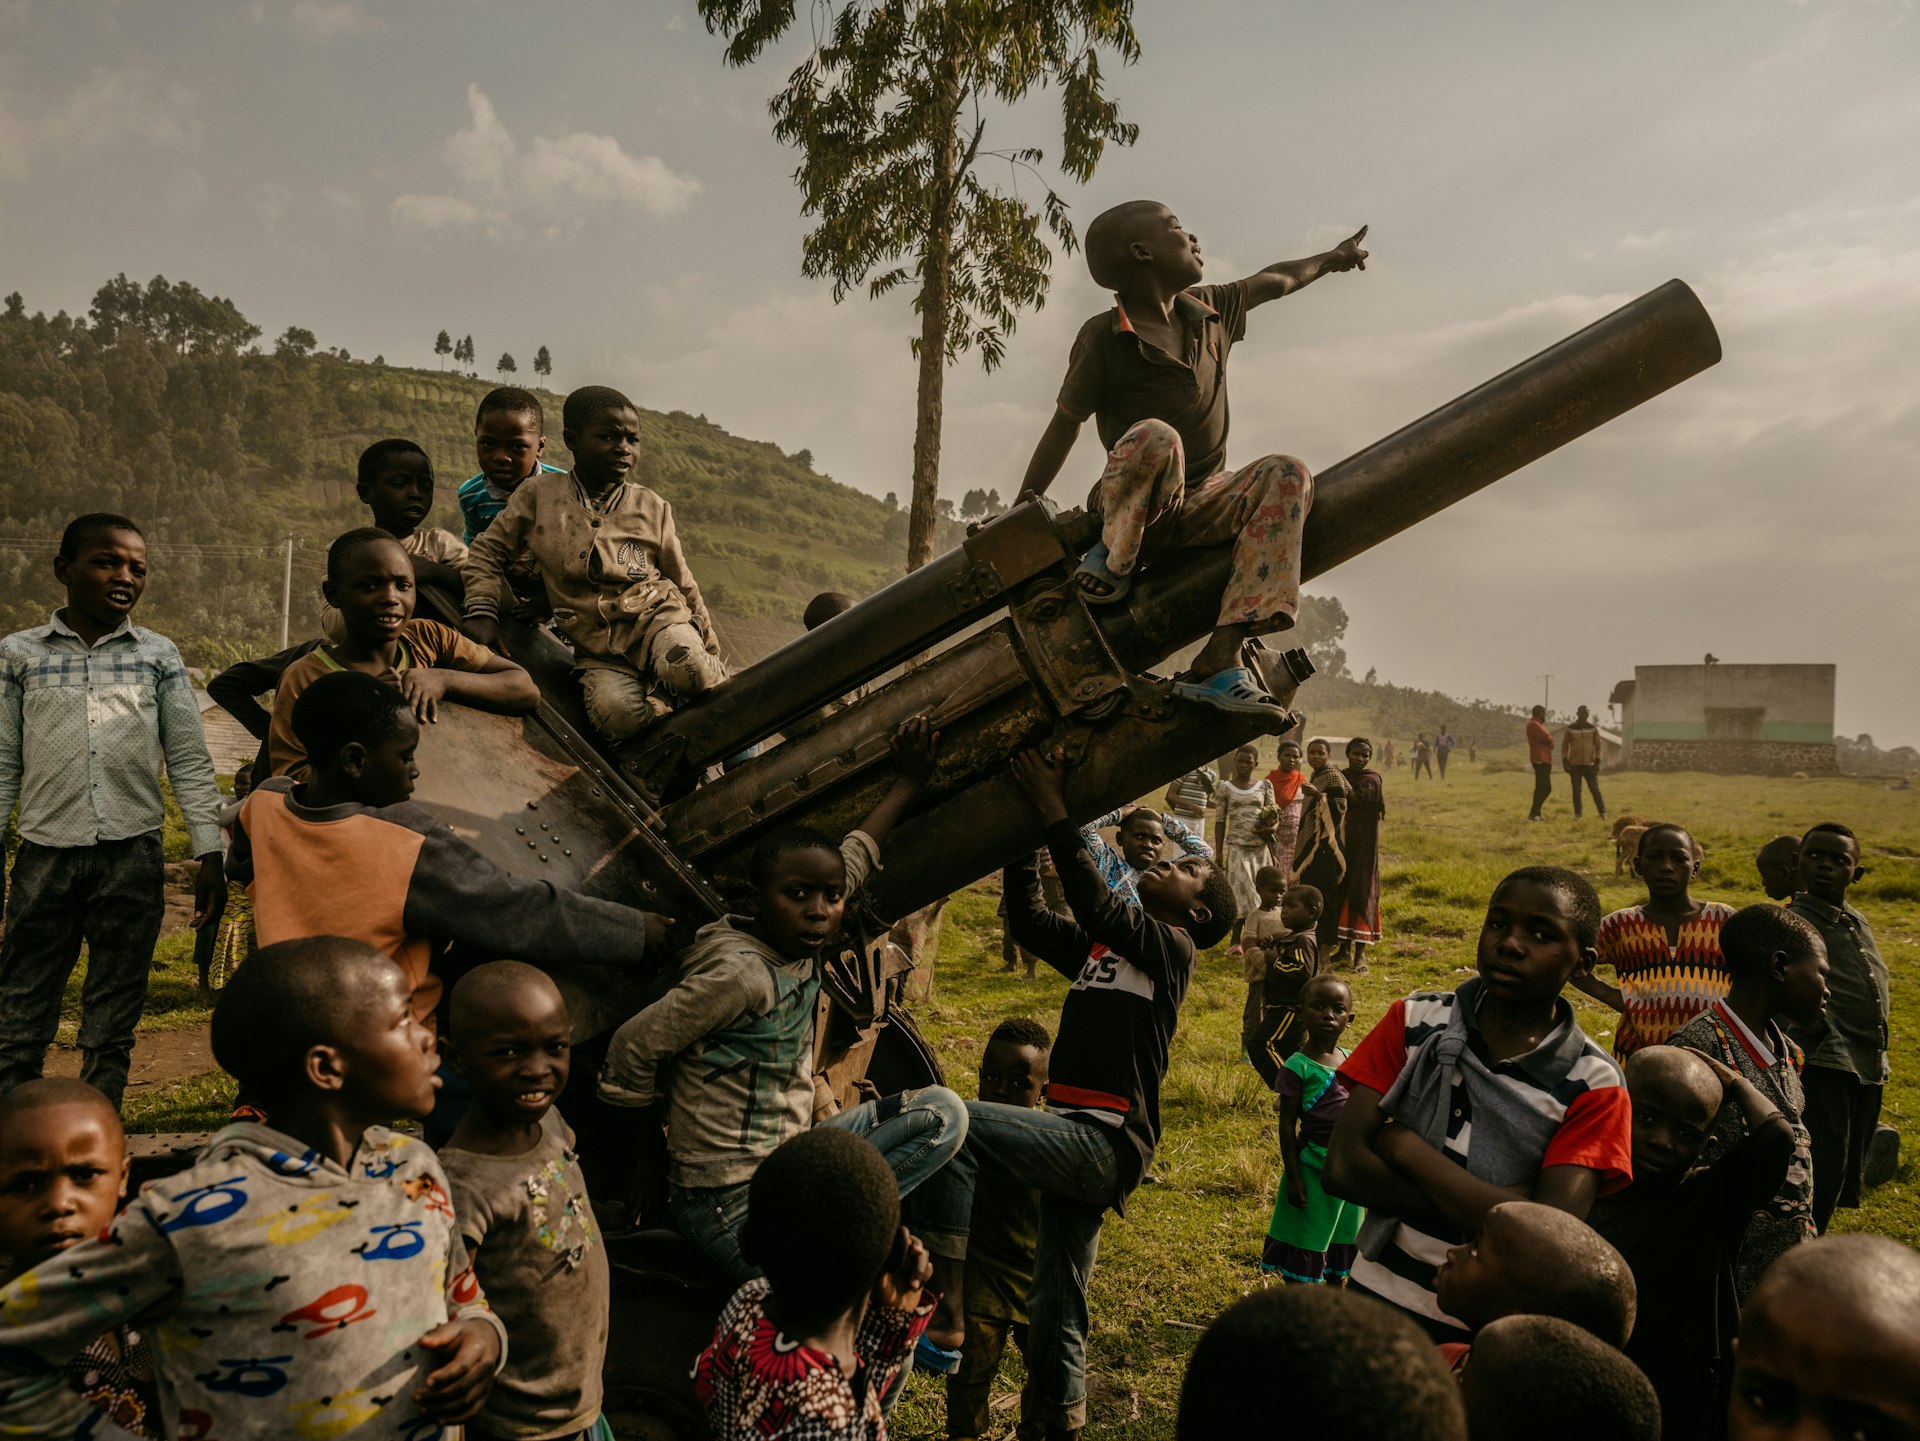 Documenting the Women’s Peace Movement in Congo